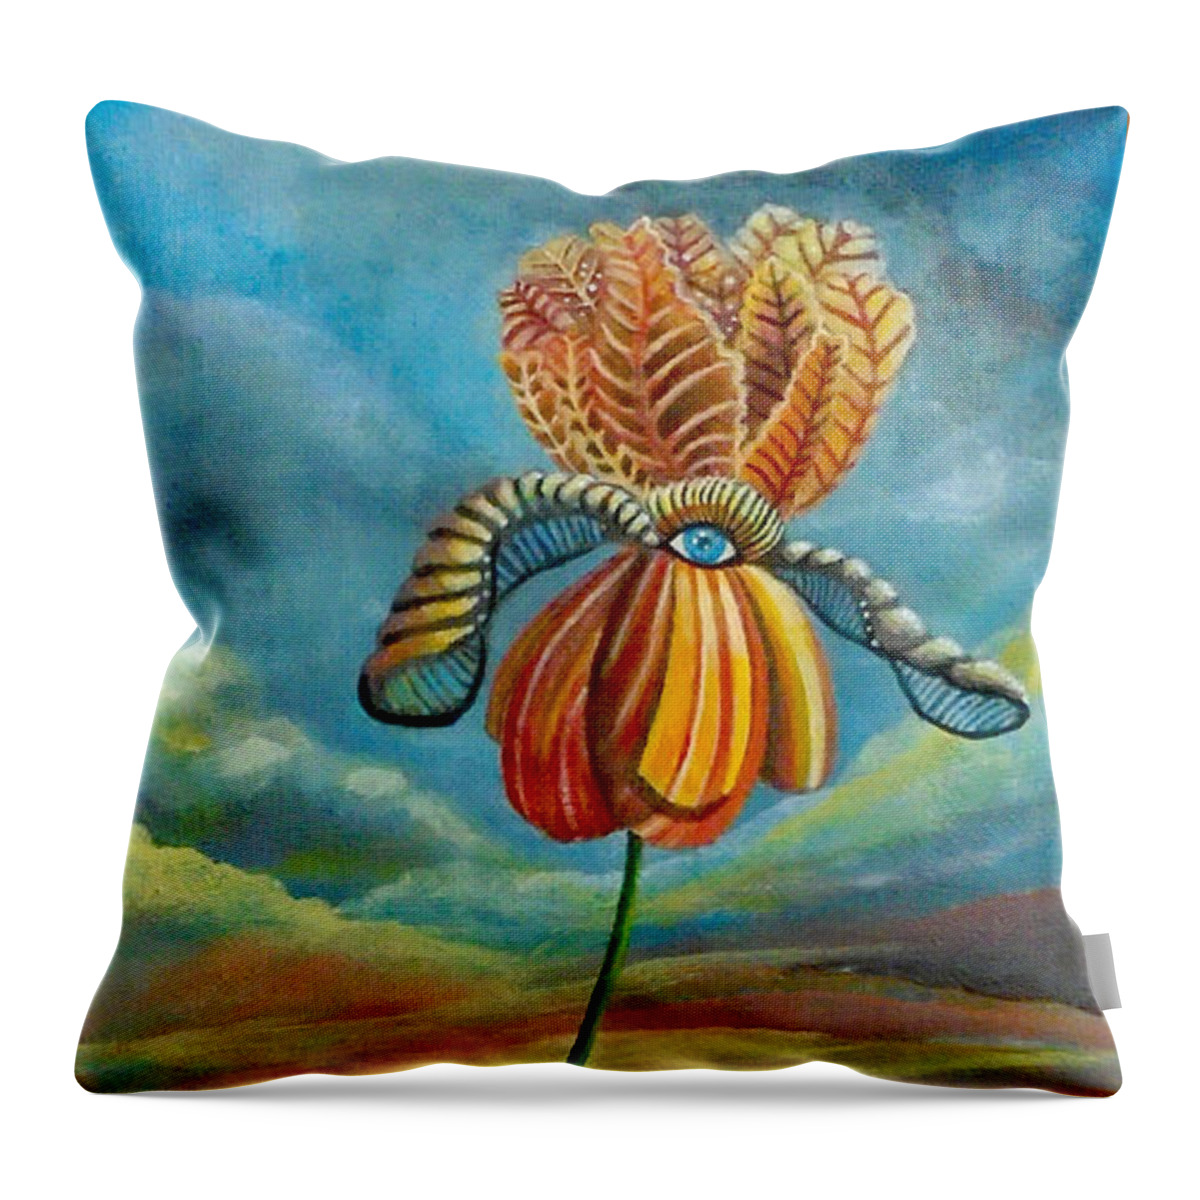 Flower Throw Pillow featuring the painting Onwards by Mindy Huntress